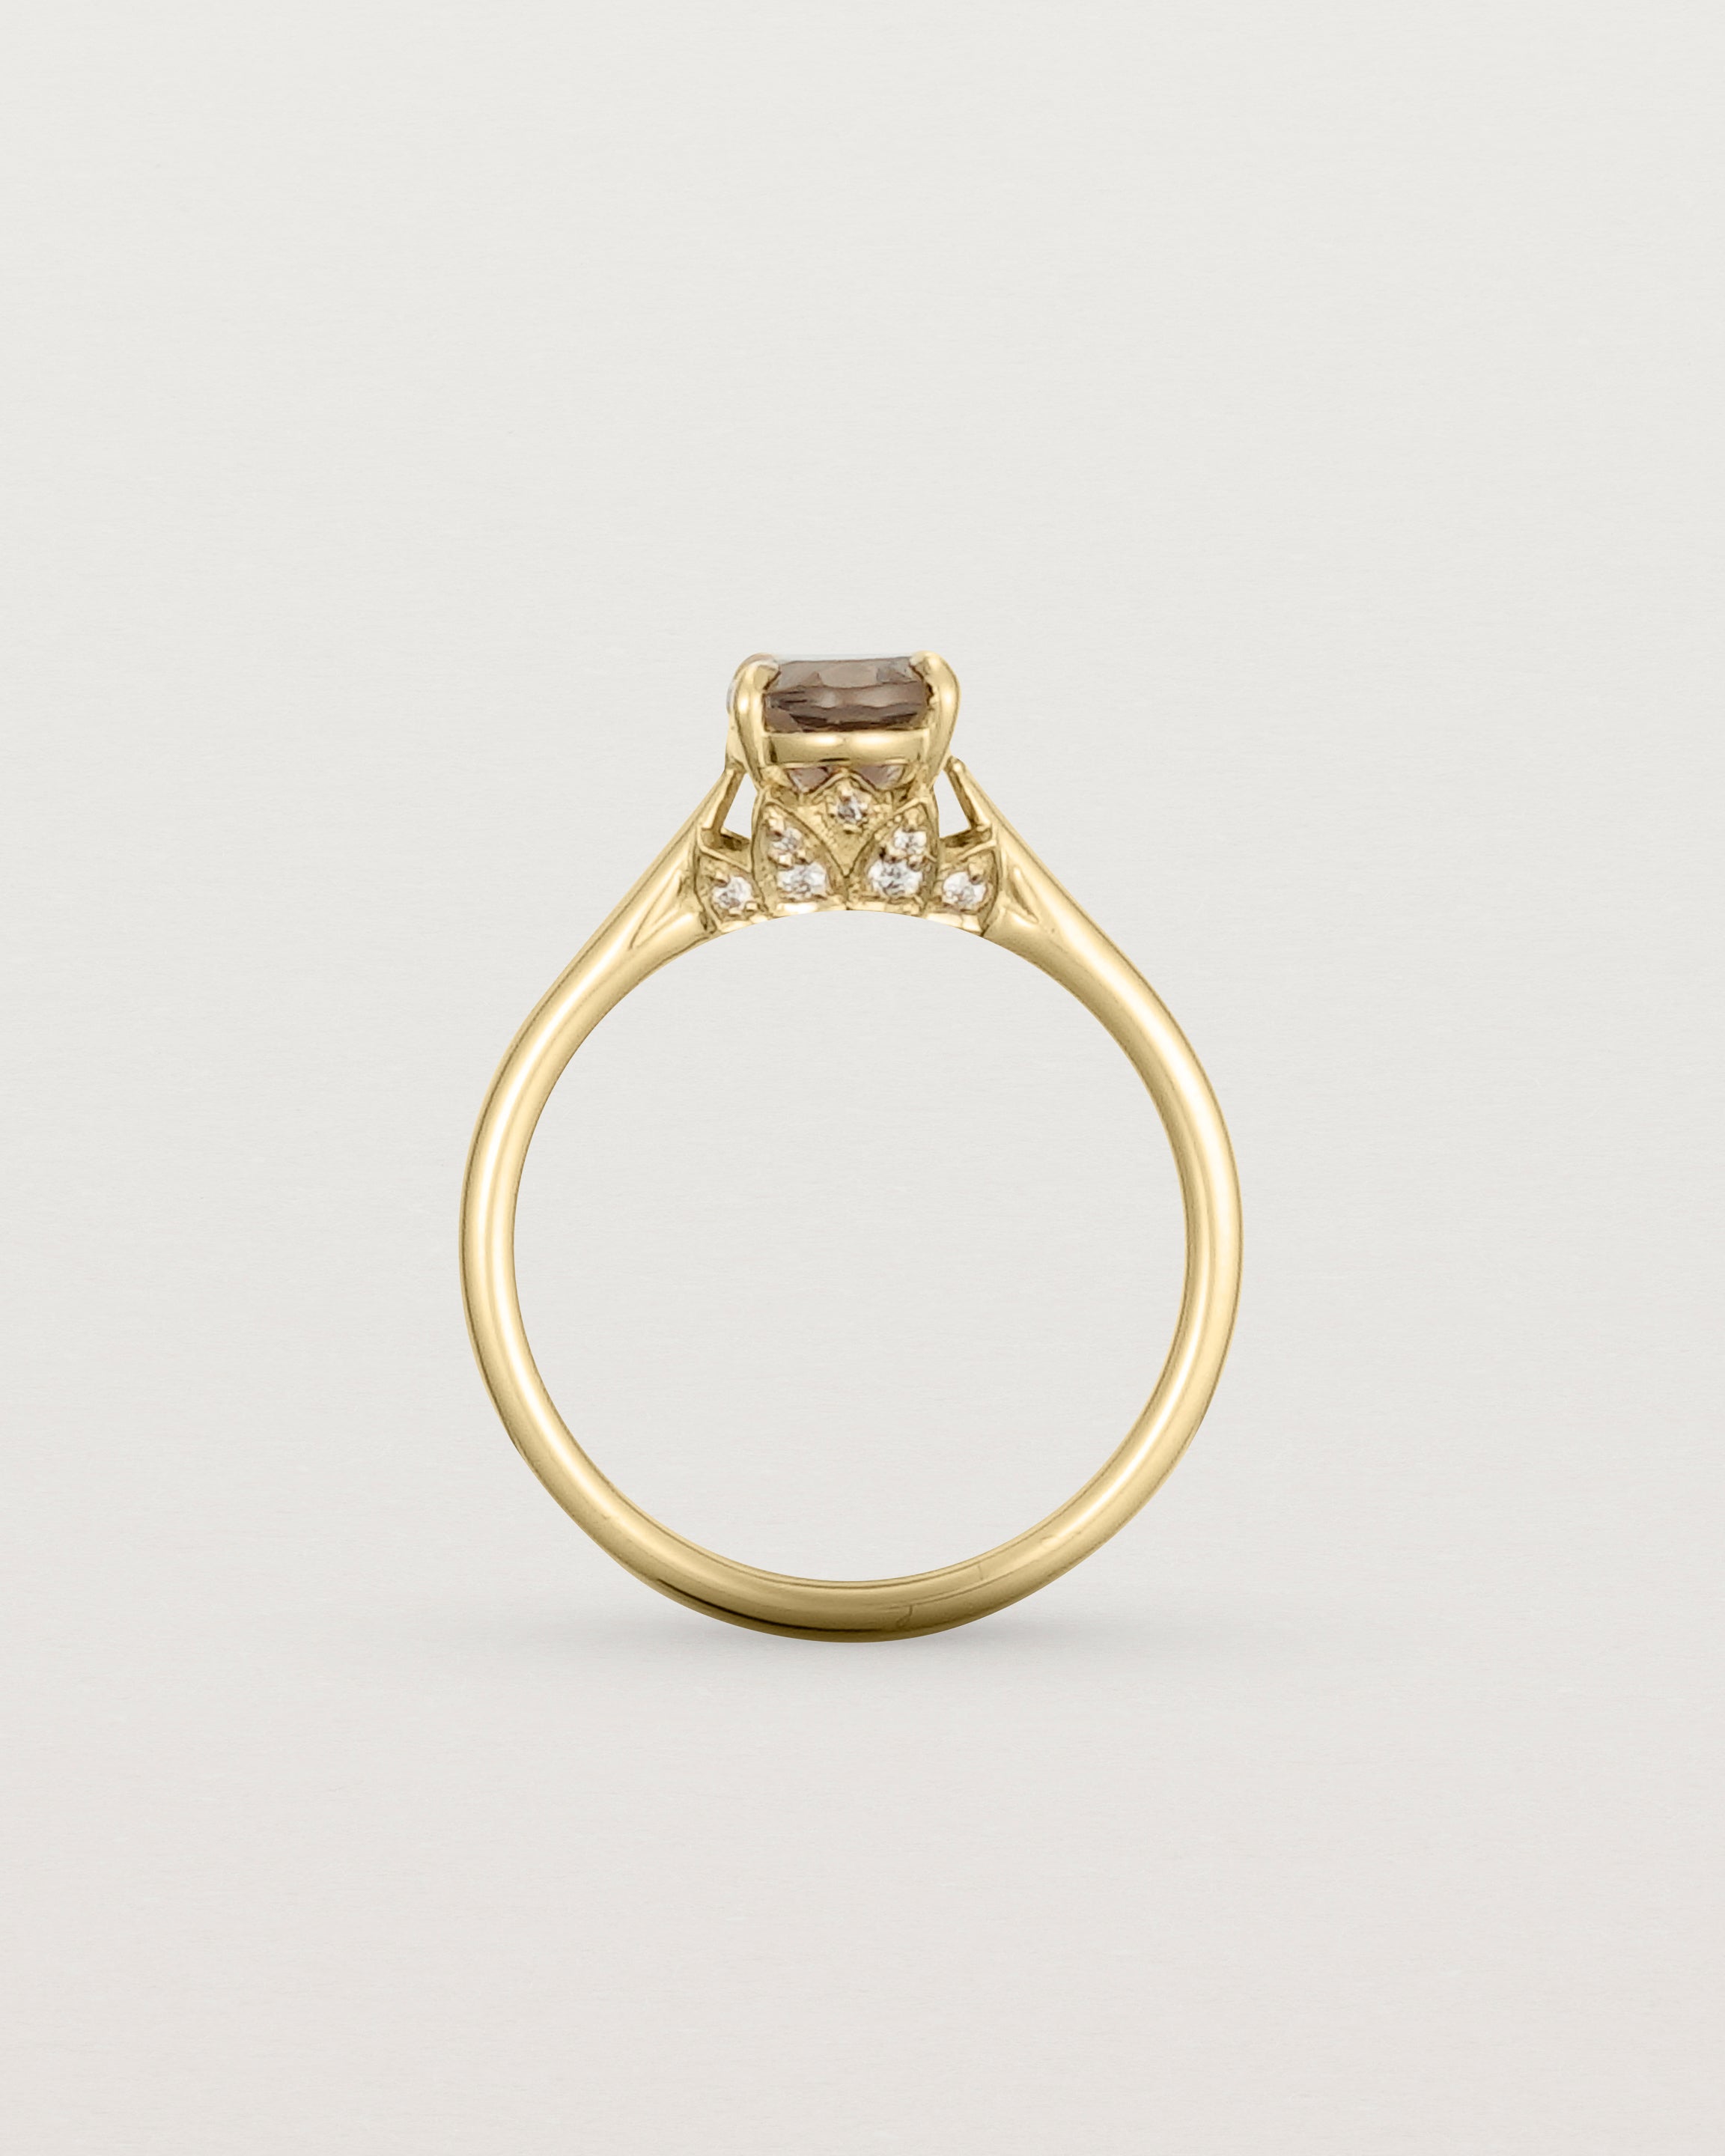 Standing view of the Kalina Oval Solitaire | Smokey Quartz | Yellow Gold.